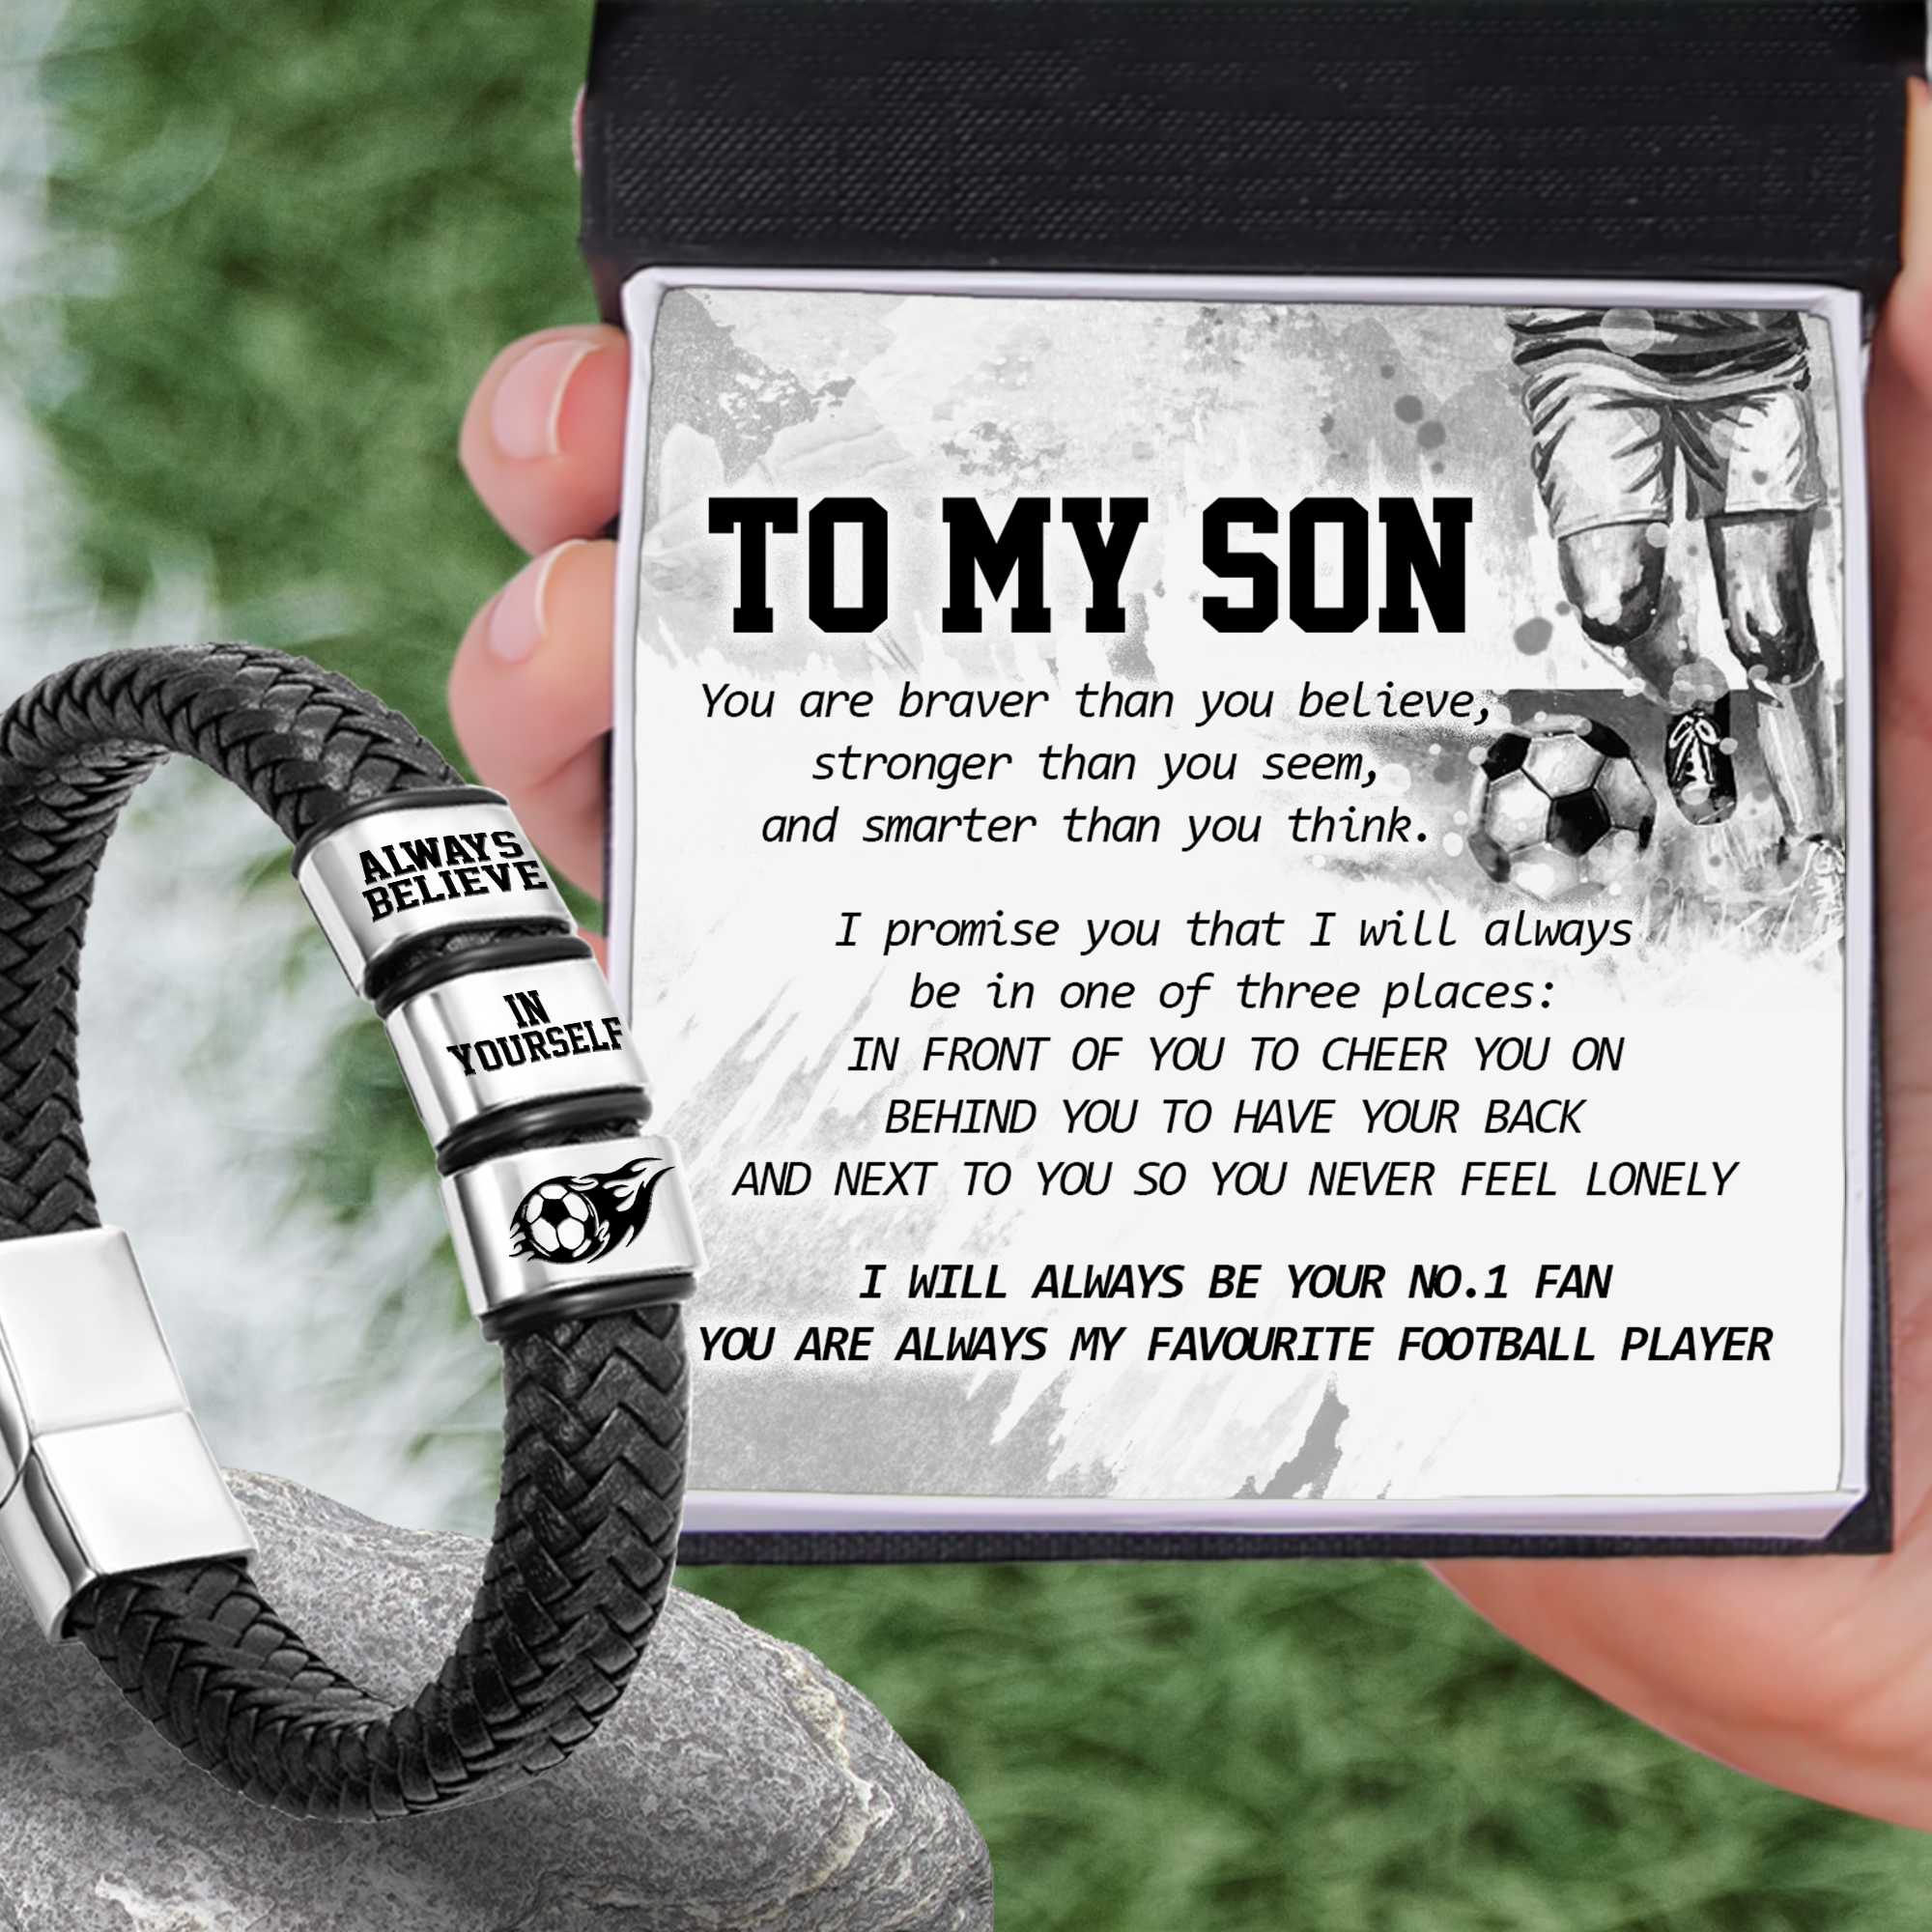 Leather Bracelet - Football - To My Son - Always Believe In Yourself - Ukgbzl16013